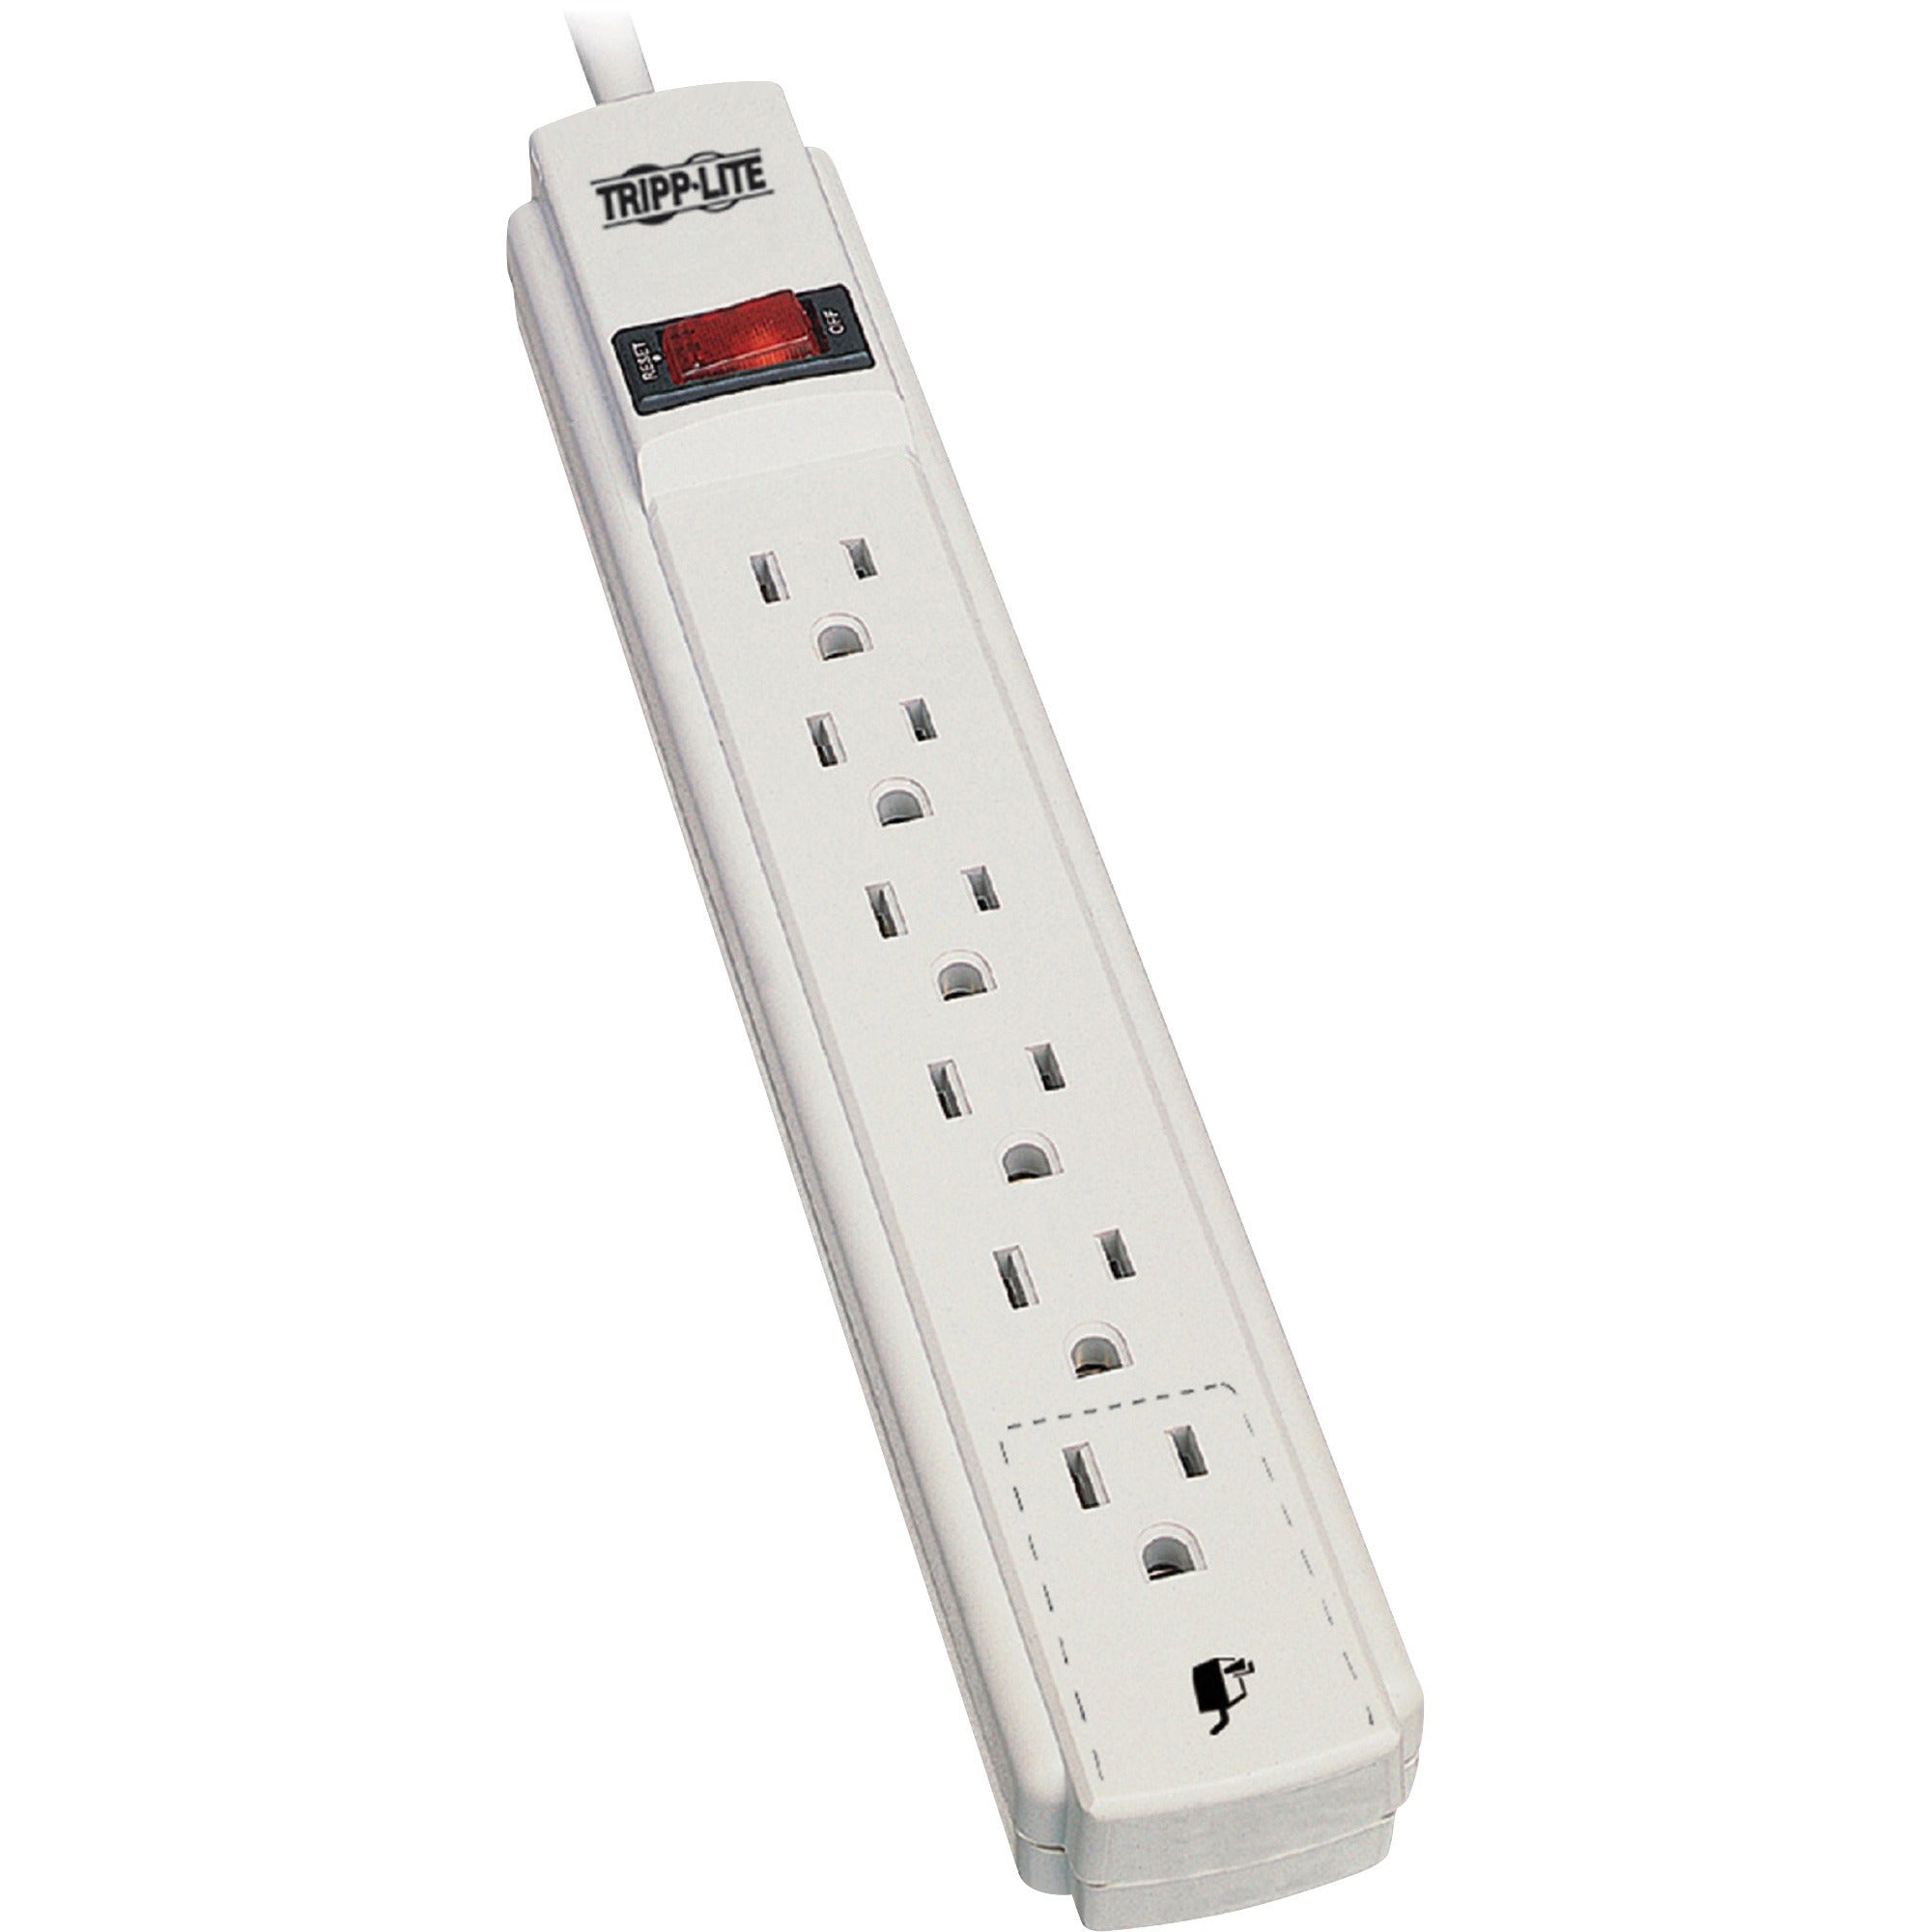 tripp-lite-by-eaton-power-it!-6-outlet-power-strip-15-ft-457-m-cord-nema-5-15p-6-x-nema-5-15r-15-ft-cord-15-a-current-120-v-ac-voltage-1875-w-wall-mountable-white_trpps615 - 1